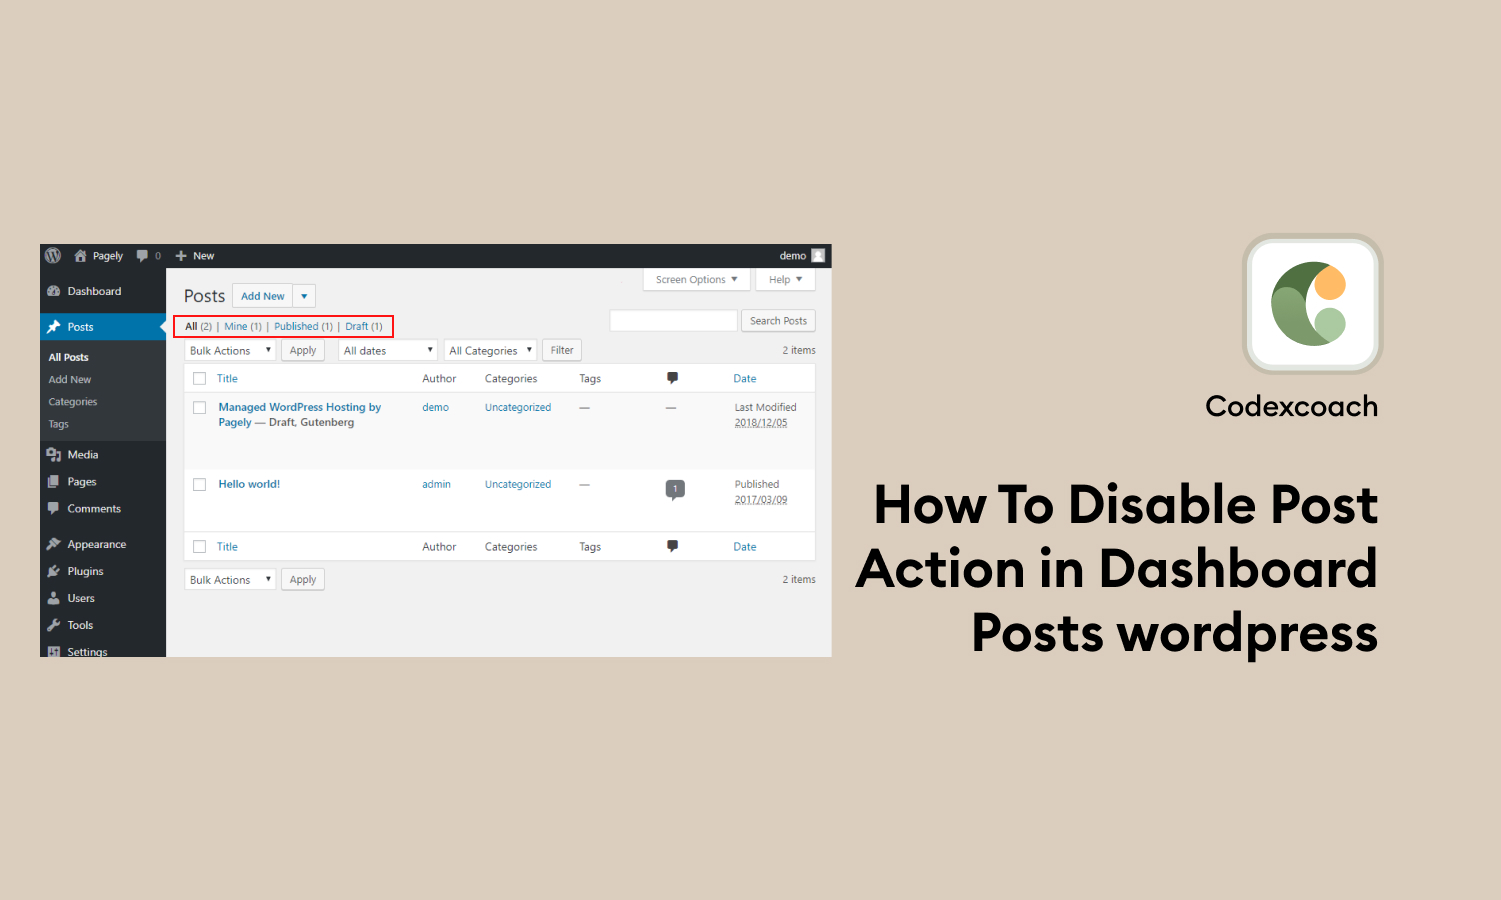 How To Disable Post Action in Dashboard Posts wordpress